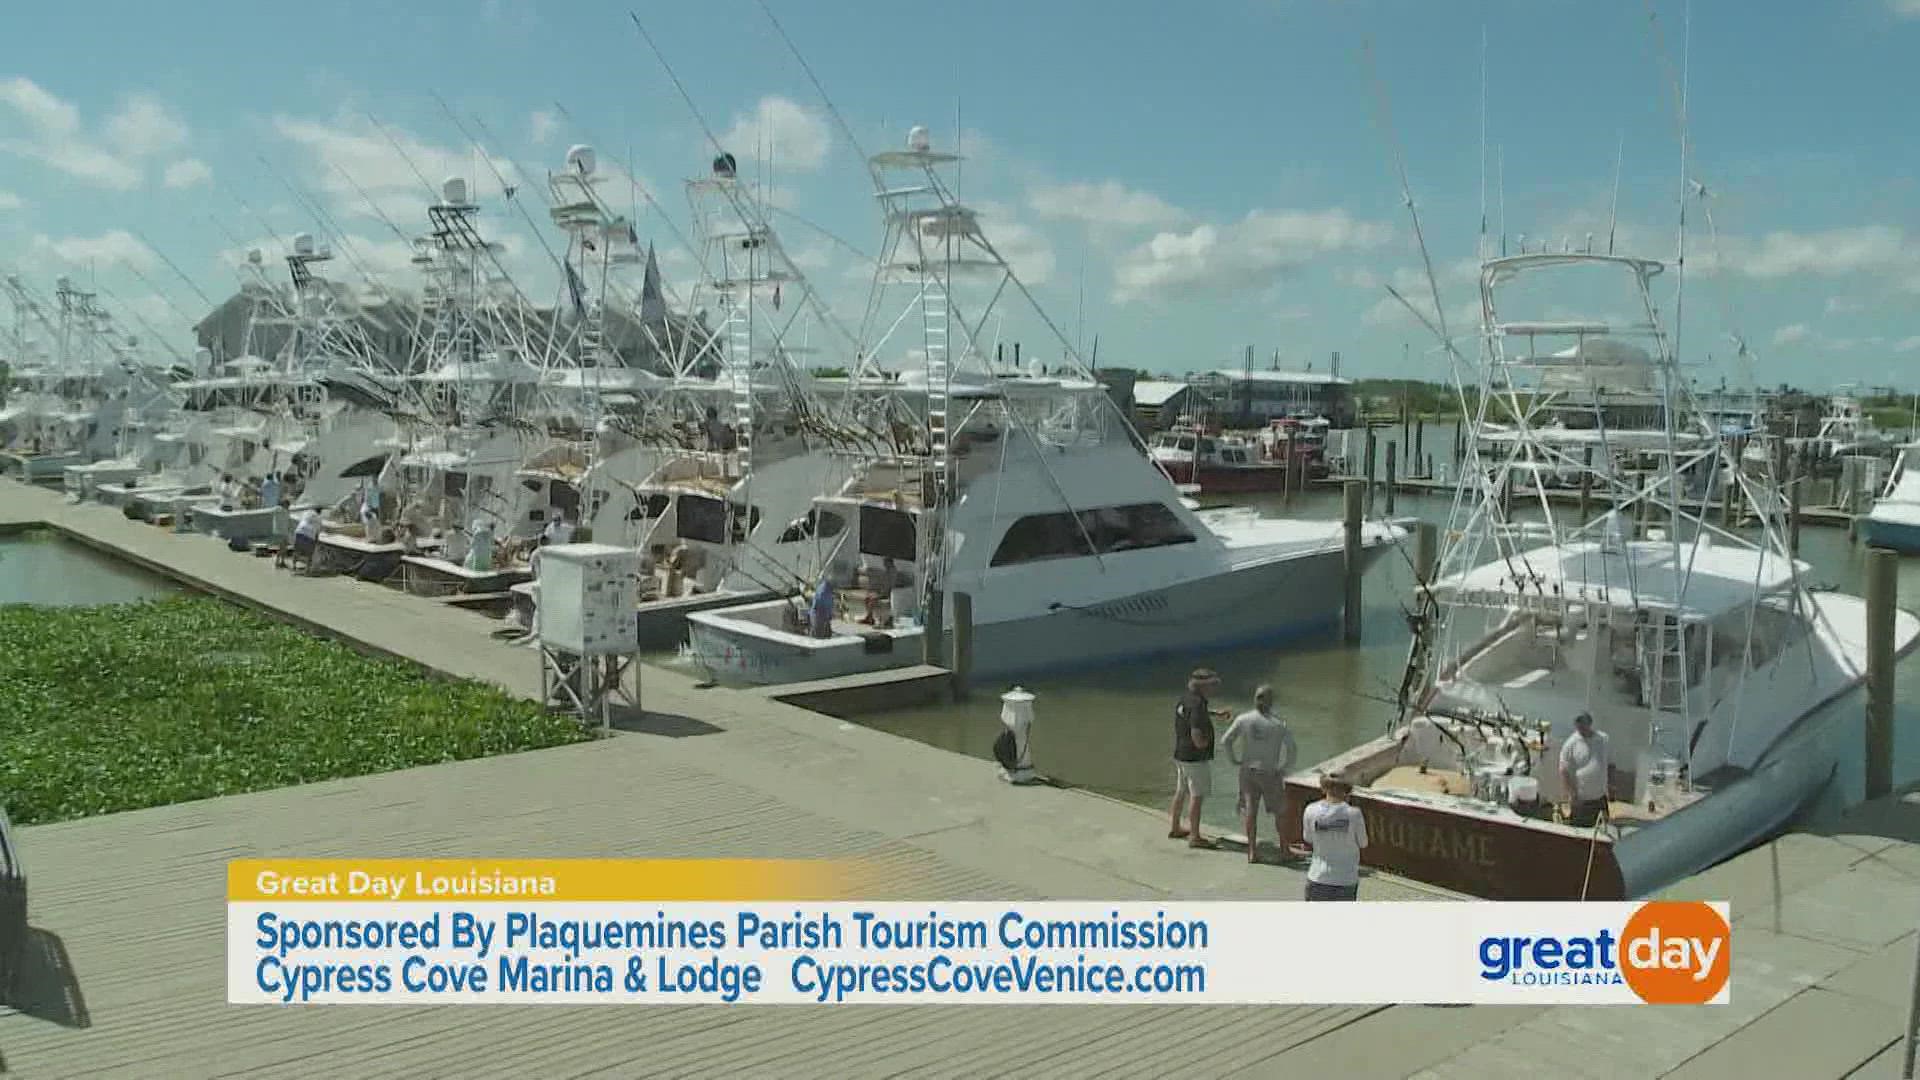 The owners of Cypress Cove Marina and Lodge showcase their world-class fishing opportunities, newly renovated lodging and what's on the menu at their restaurant.